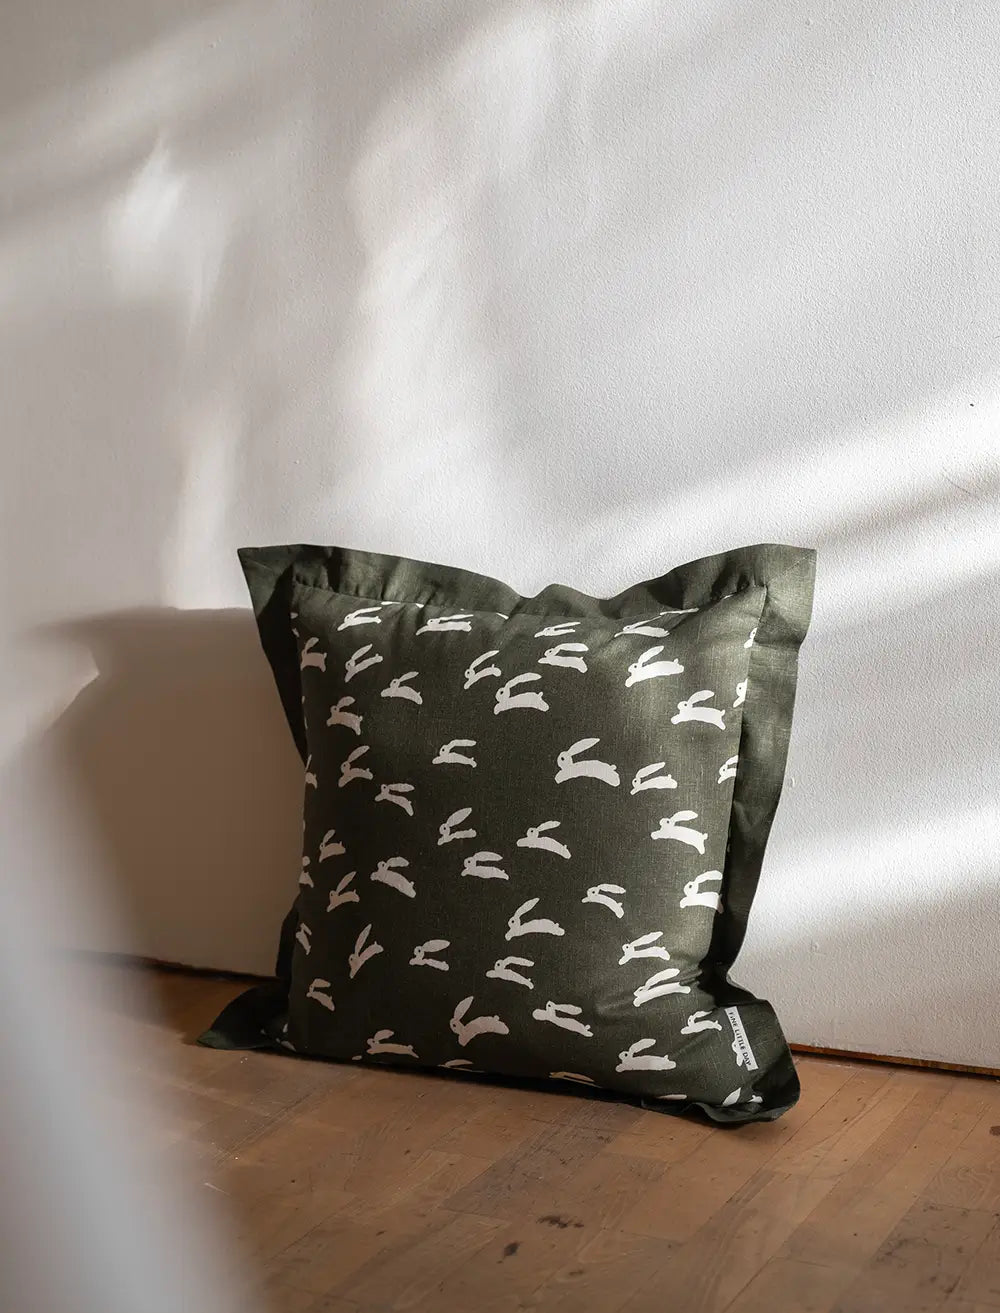 On the floor sits A square moss green cushion with playful white rabbit print by Fine Little Day